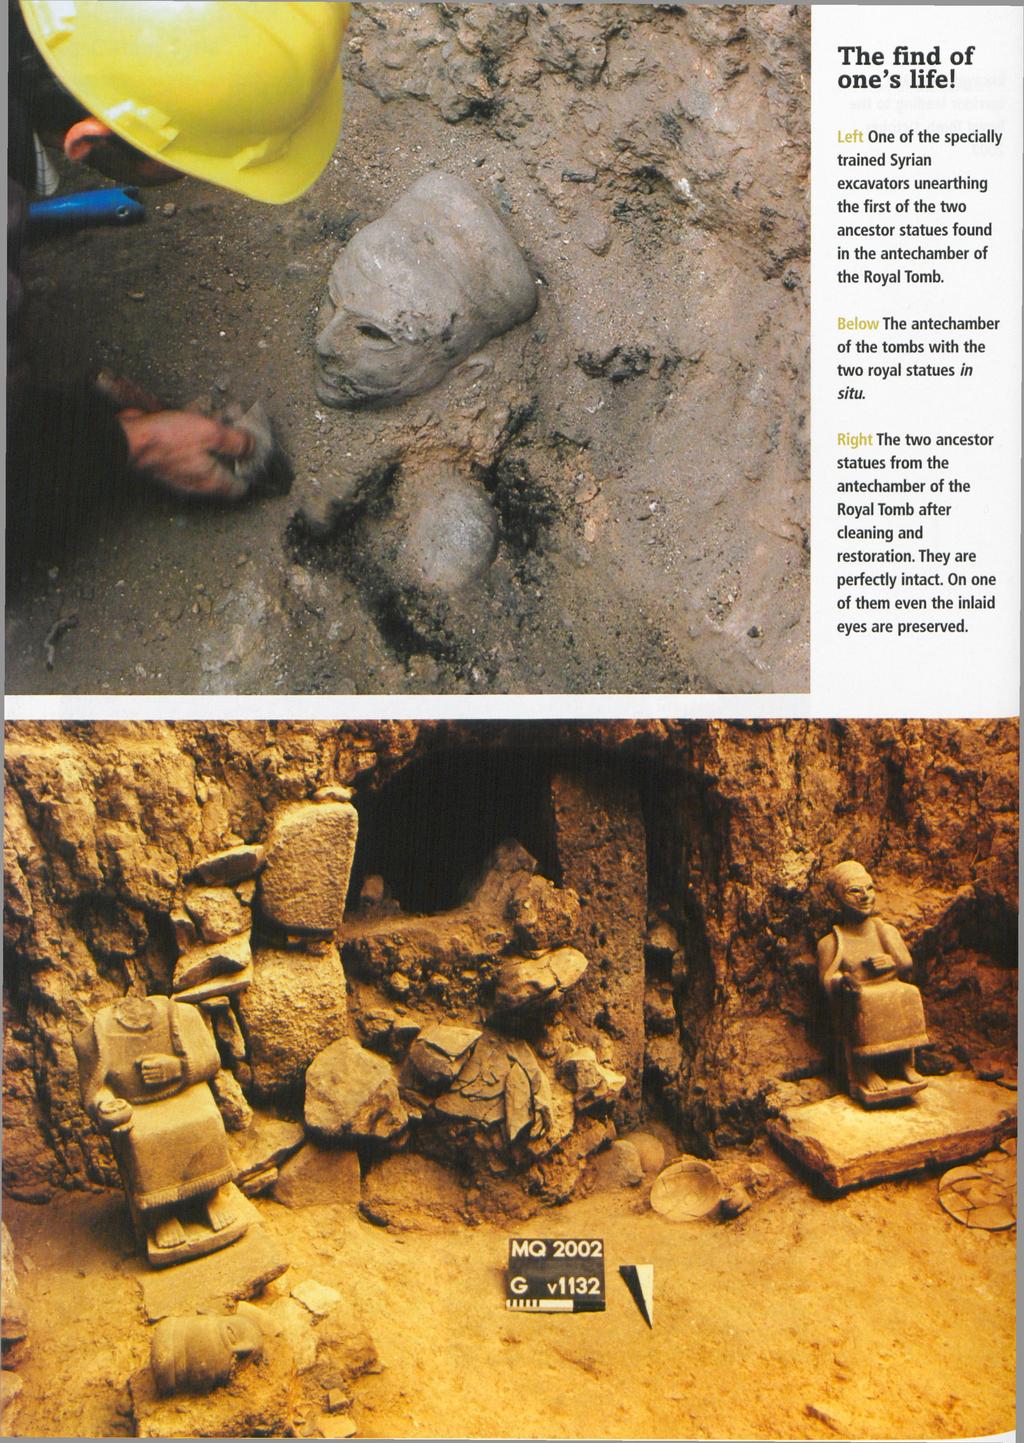 The find of one s life! Left One of the specially trained Syrian excavators unearthing the first of the two ancestor statues found in the antechamber of the Royal Tomb.